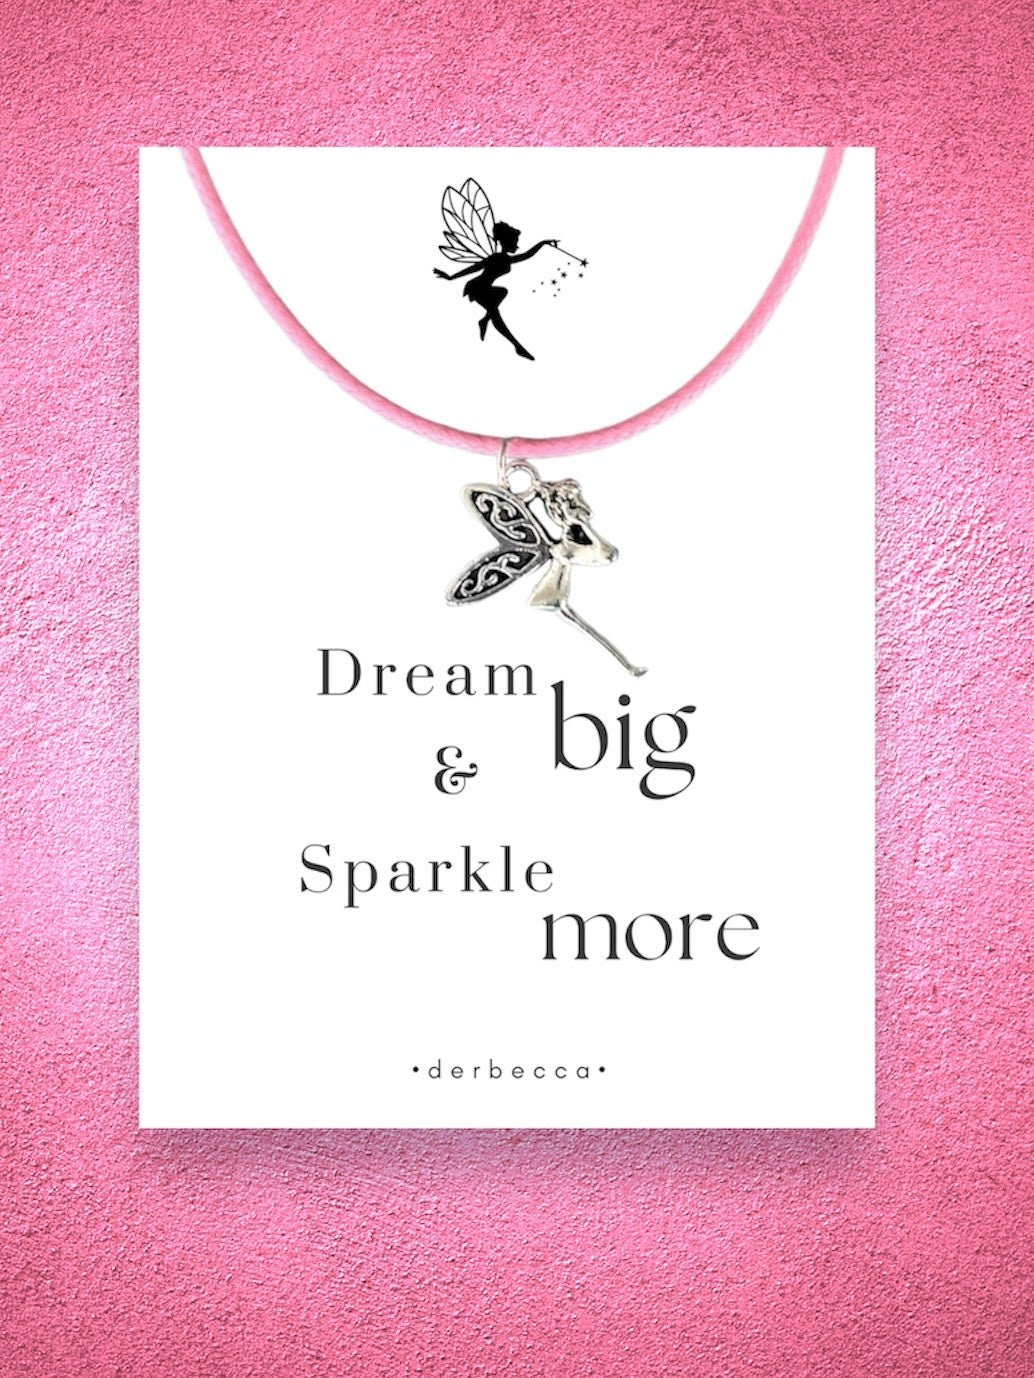 Fairy Charm Pendant Necklace on Message Poem Verse Card that reads "Dream big & Sparkle more" with a pink cord and lobster claw clasp closure